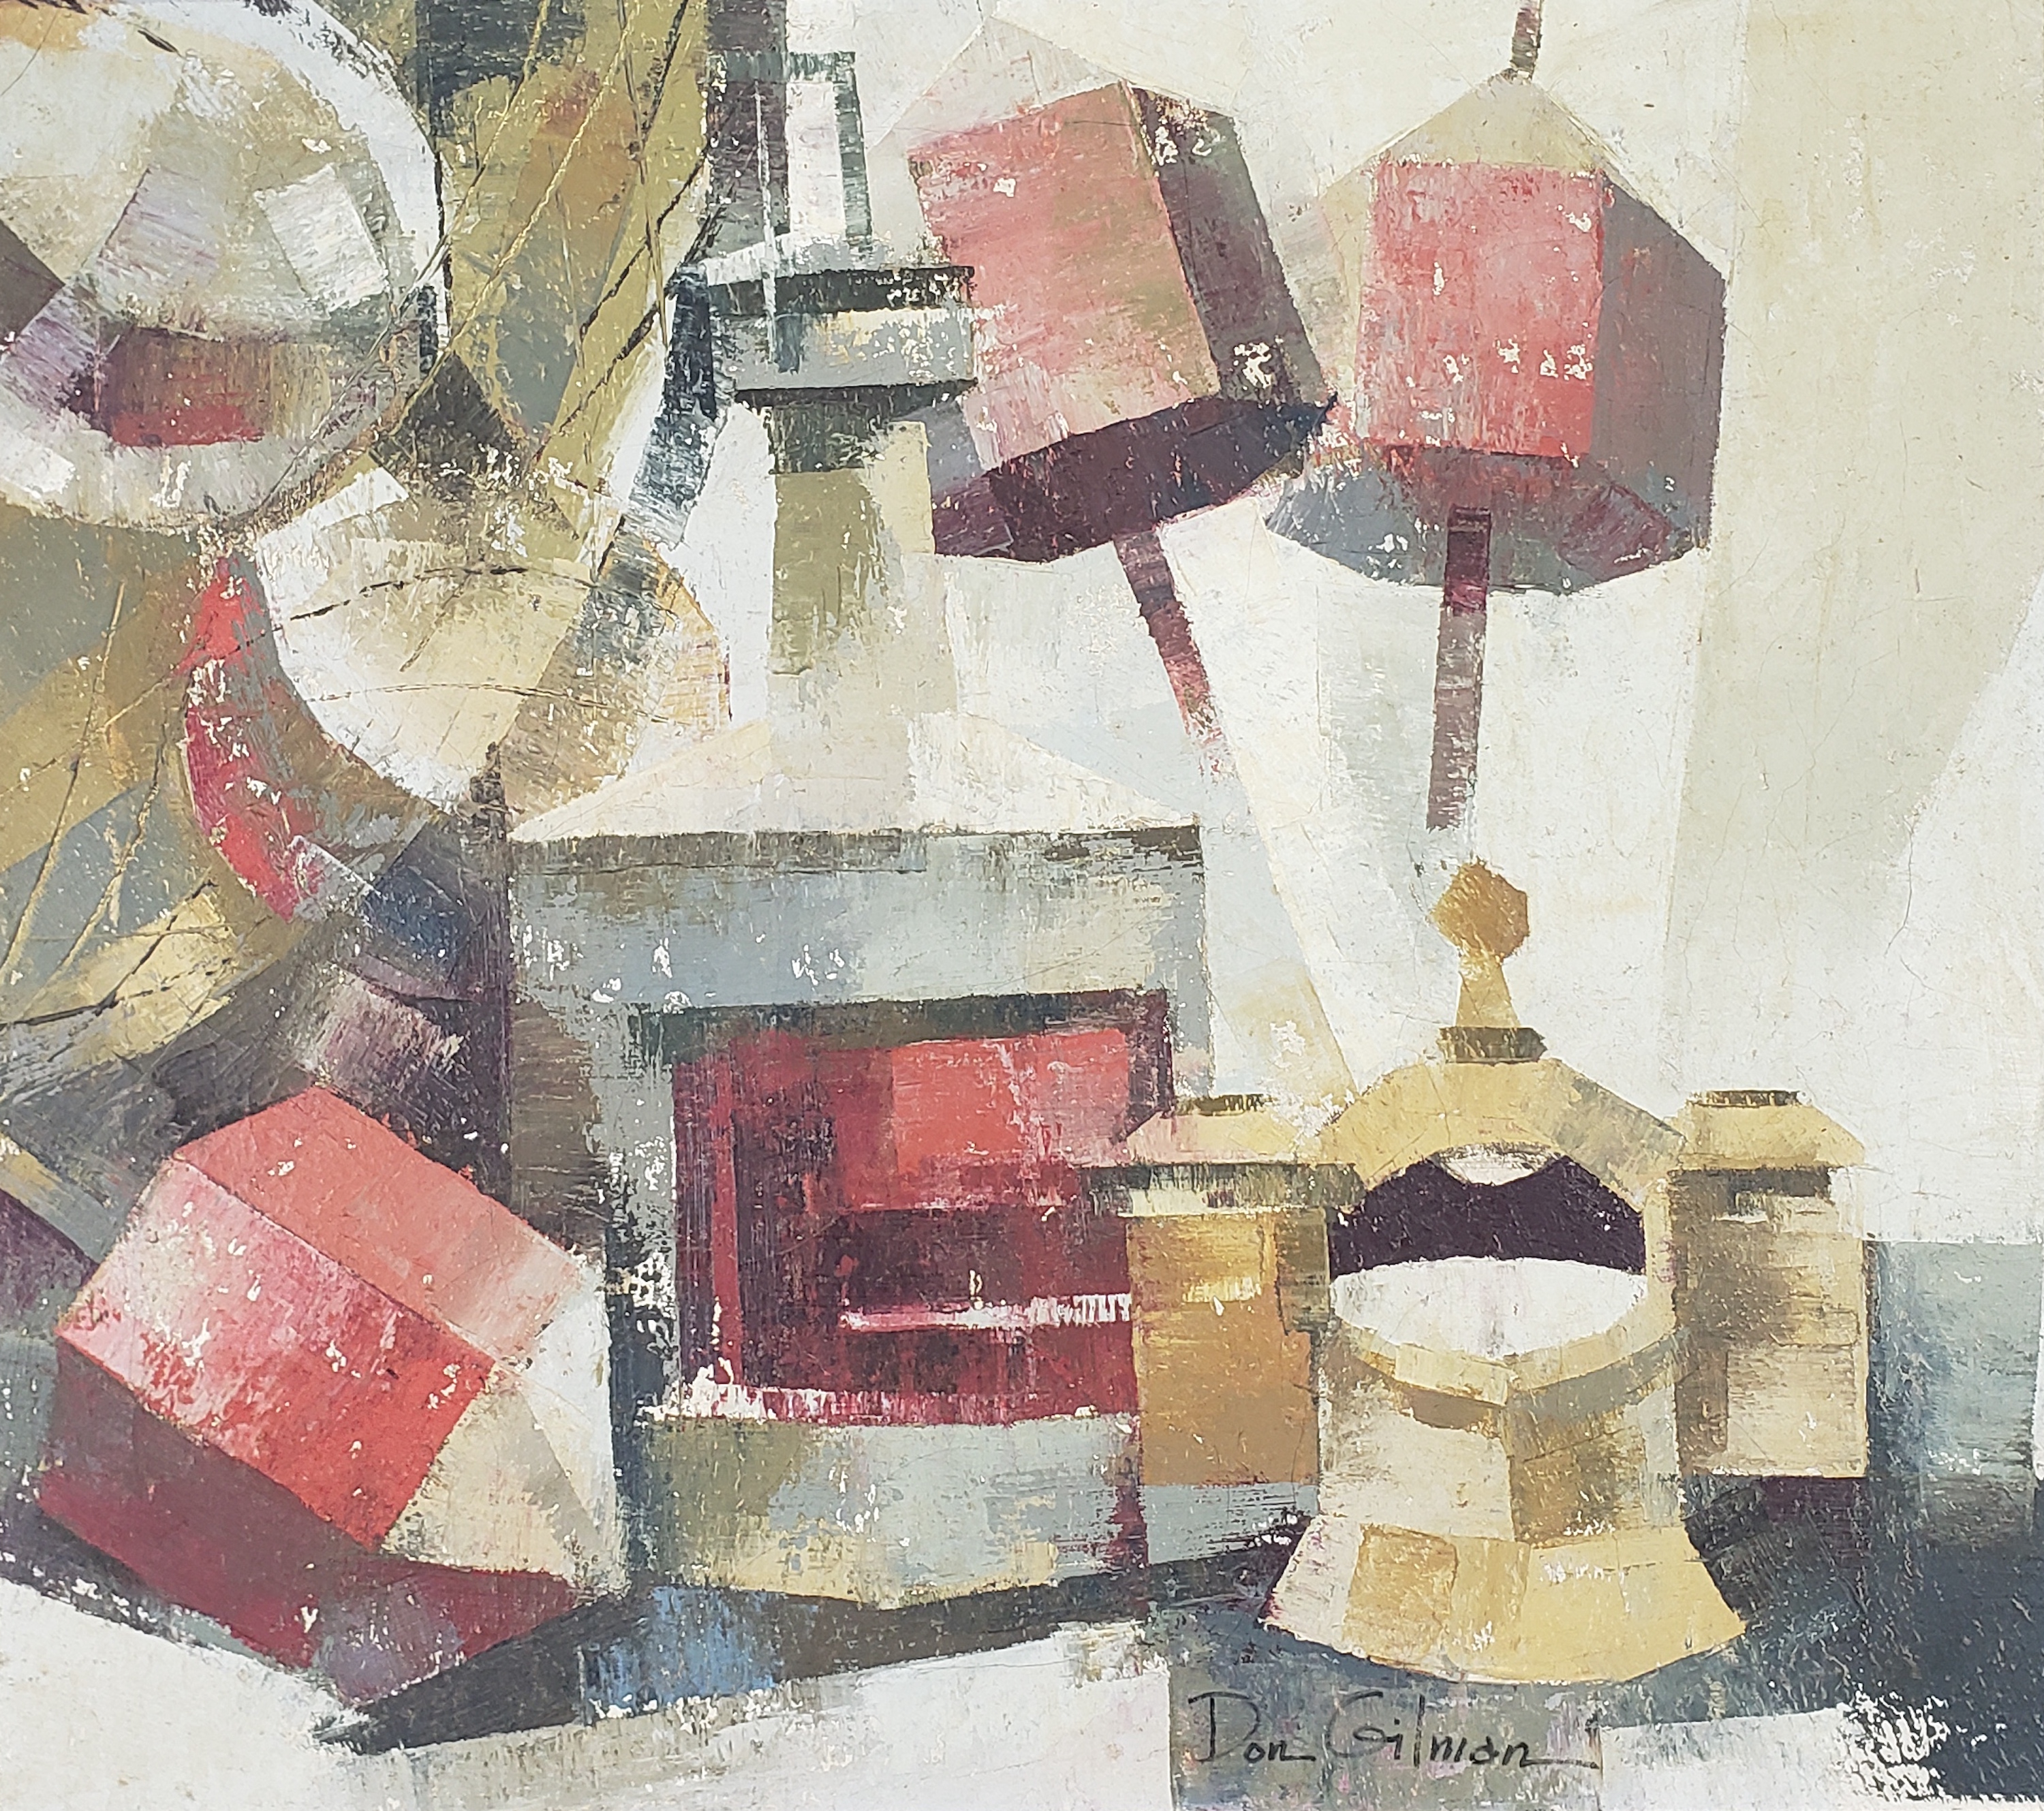 Don Gilman Oil on Canvas “Still Life with Binnacle” Cubist Painting, 20th century